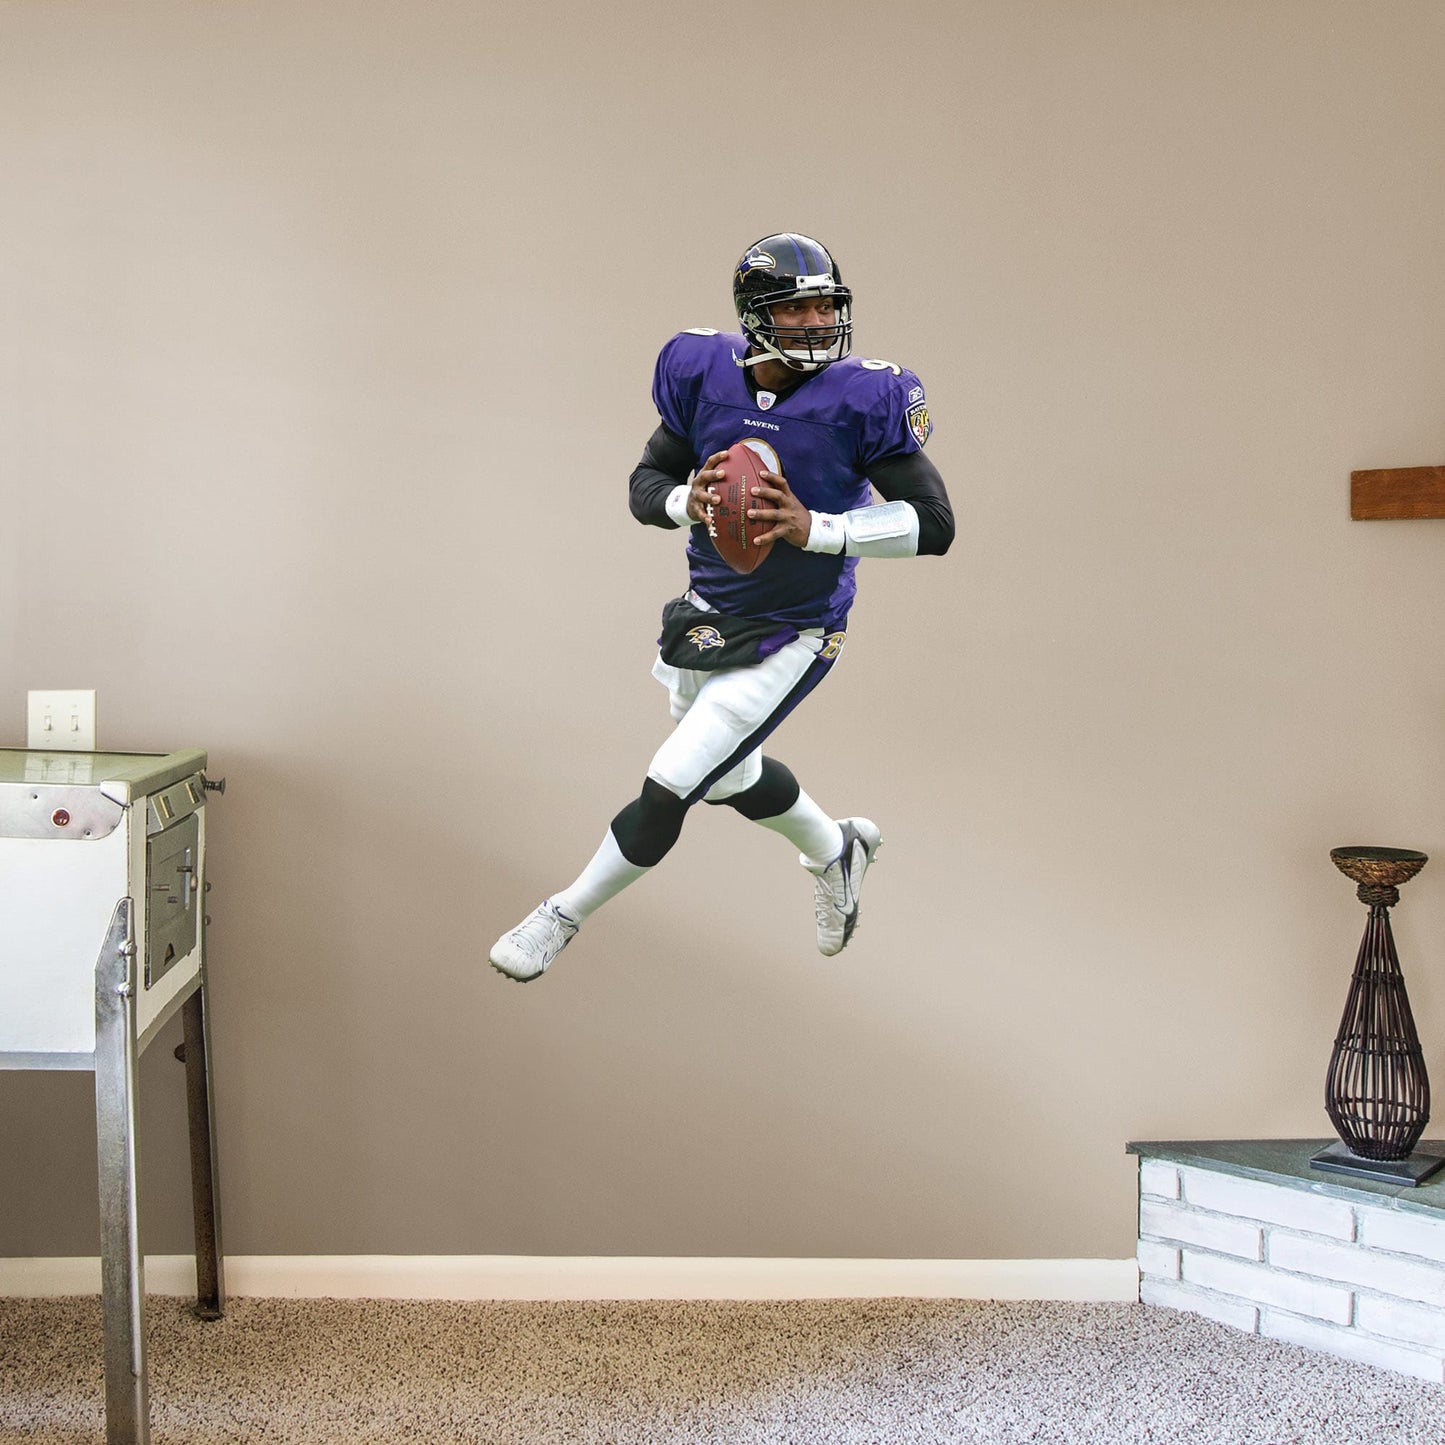 Giant Athlete + 2 Decals (32"W x 51"H) Bring the action of the NFL into your home with a wall decal of Steve McNair! High quality, durable, and tear resistant, you'll be able to stick and move it as many times as you want to create the ultimate football experience in any room!